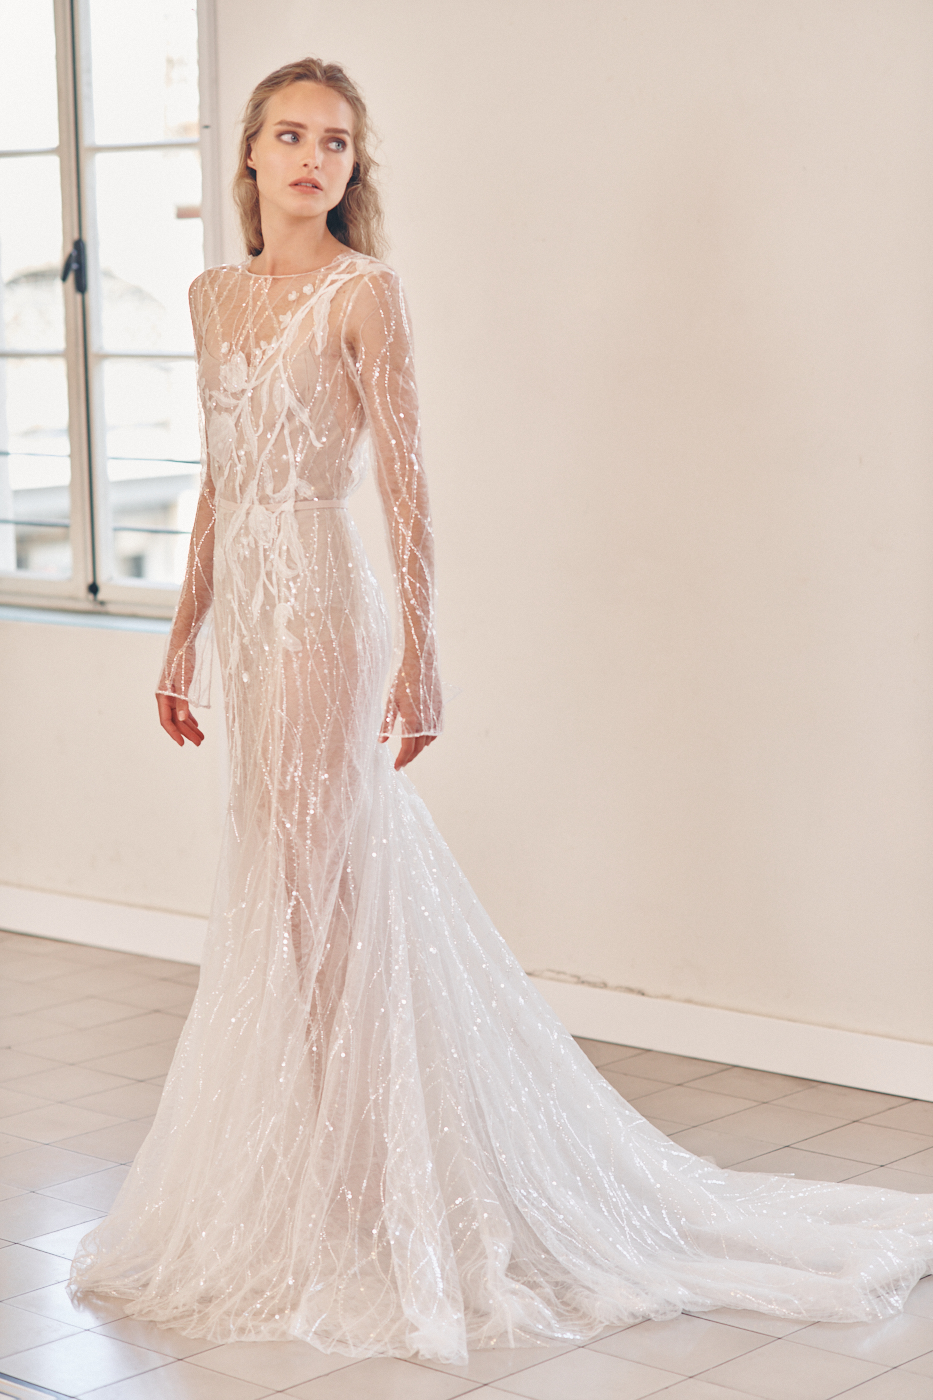 A sheer long sleeve wedding gown designed by Mira Zwillinger with shimmering flowers and a slim fit.